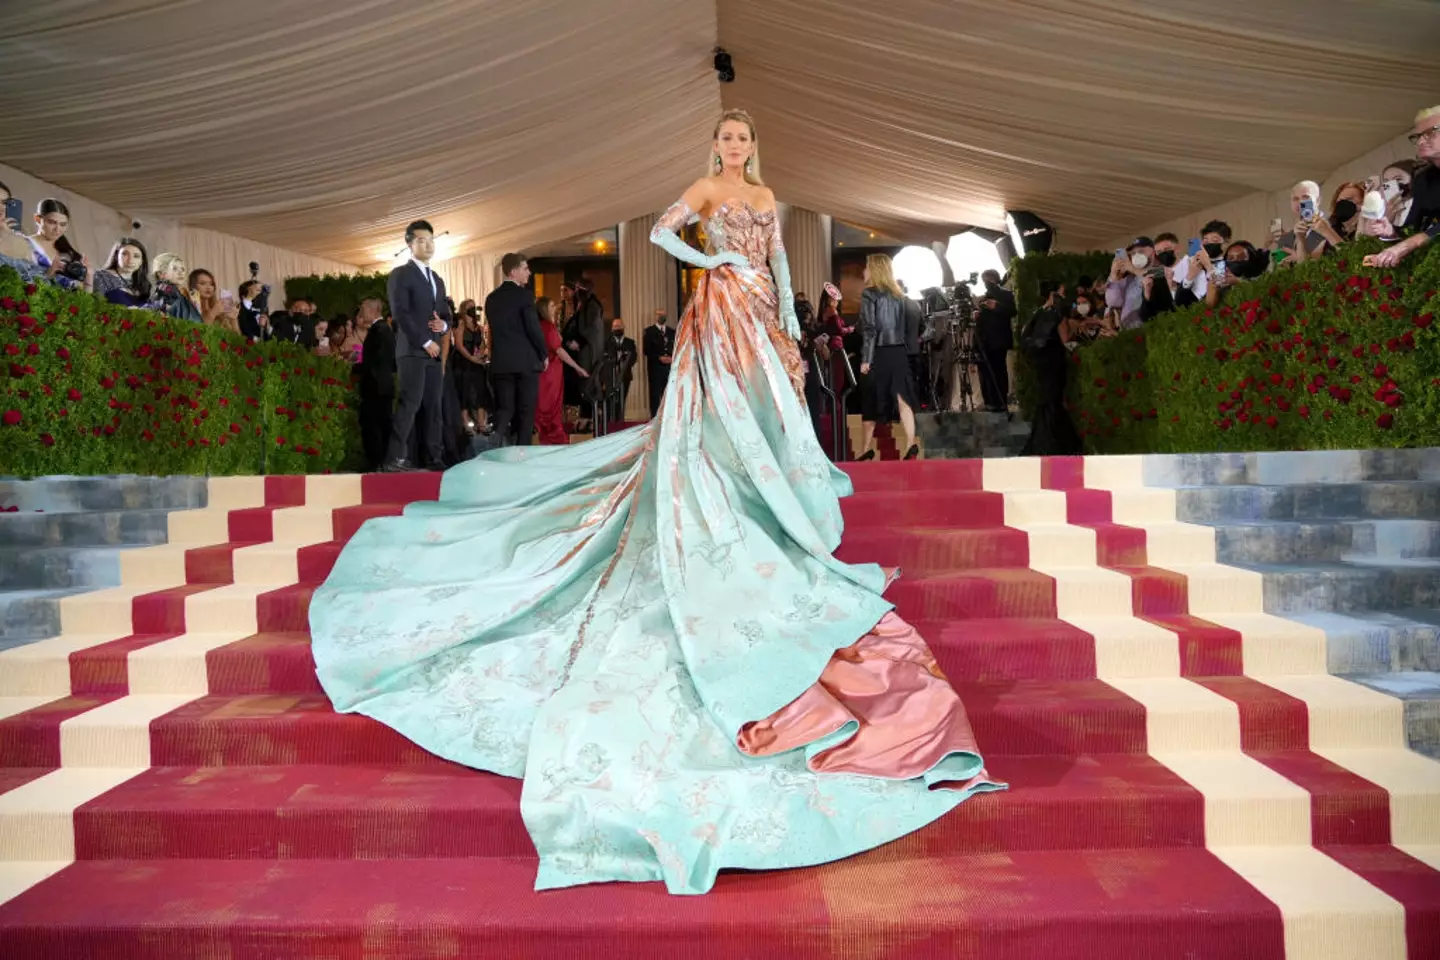 Blake Lively in Versace at the 2022 Met Gala. (Kevin Mazur/MG22/Getty Images for The Met Museum/Vogue)